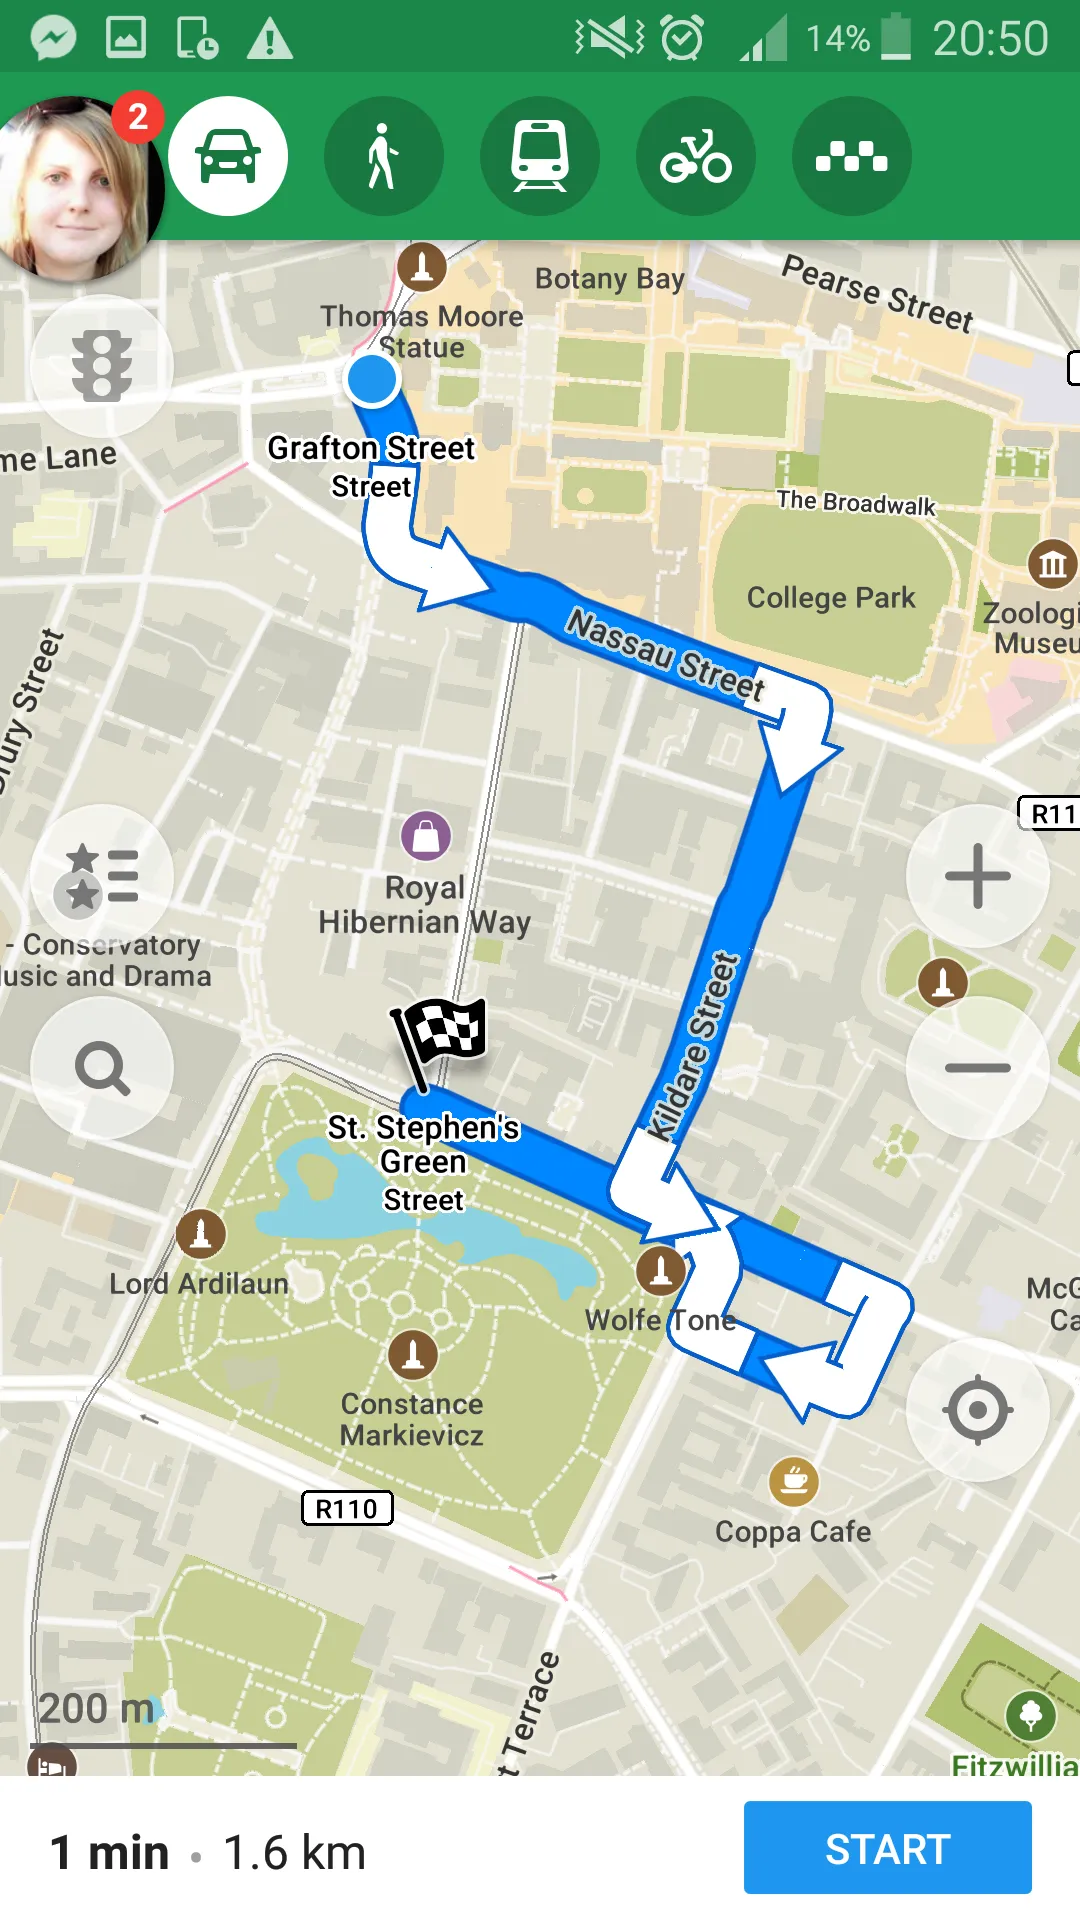 Dublin sightseeing route fragment in Maps Me android app2